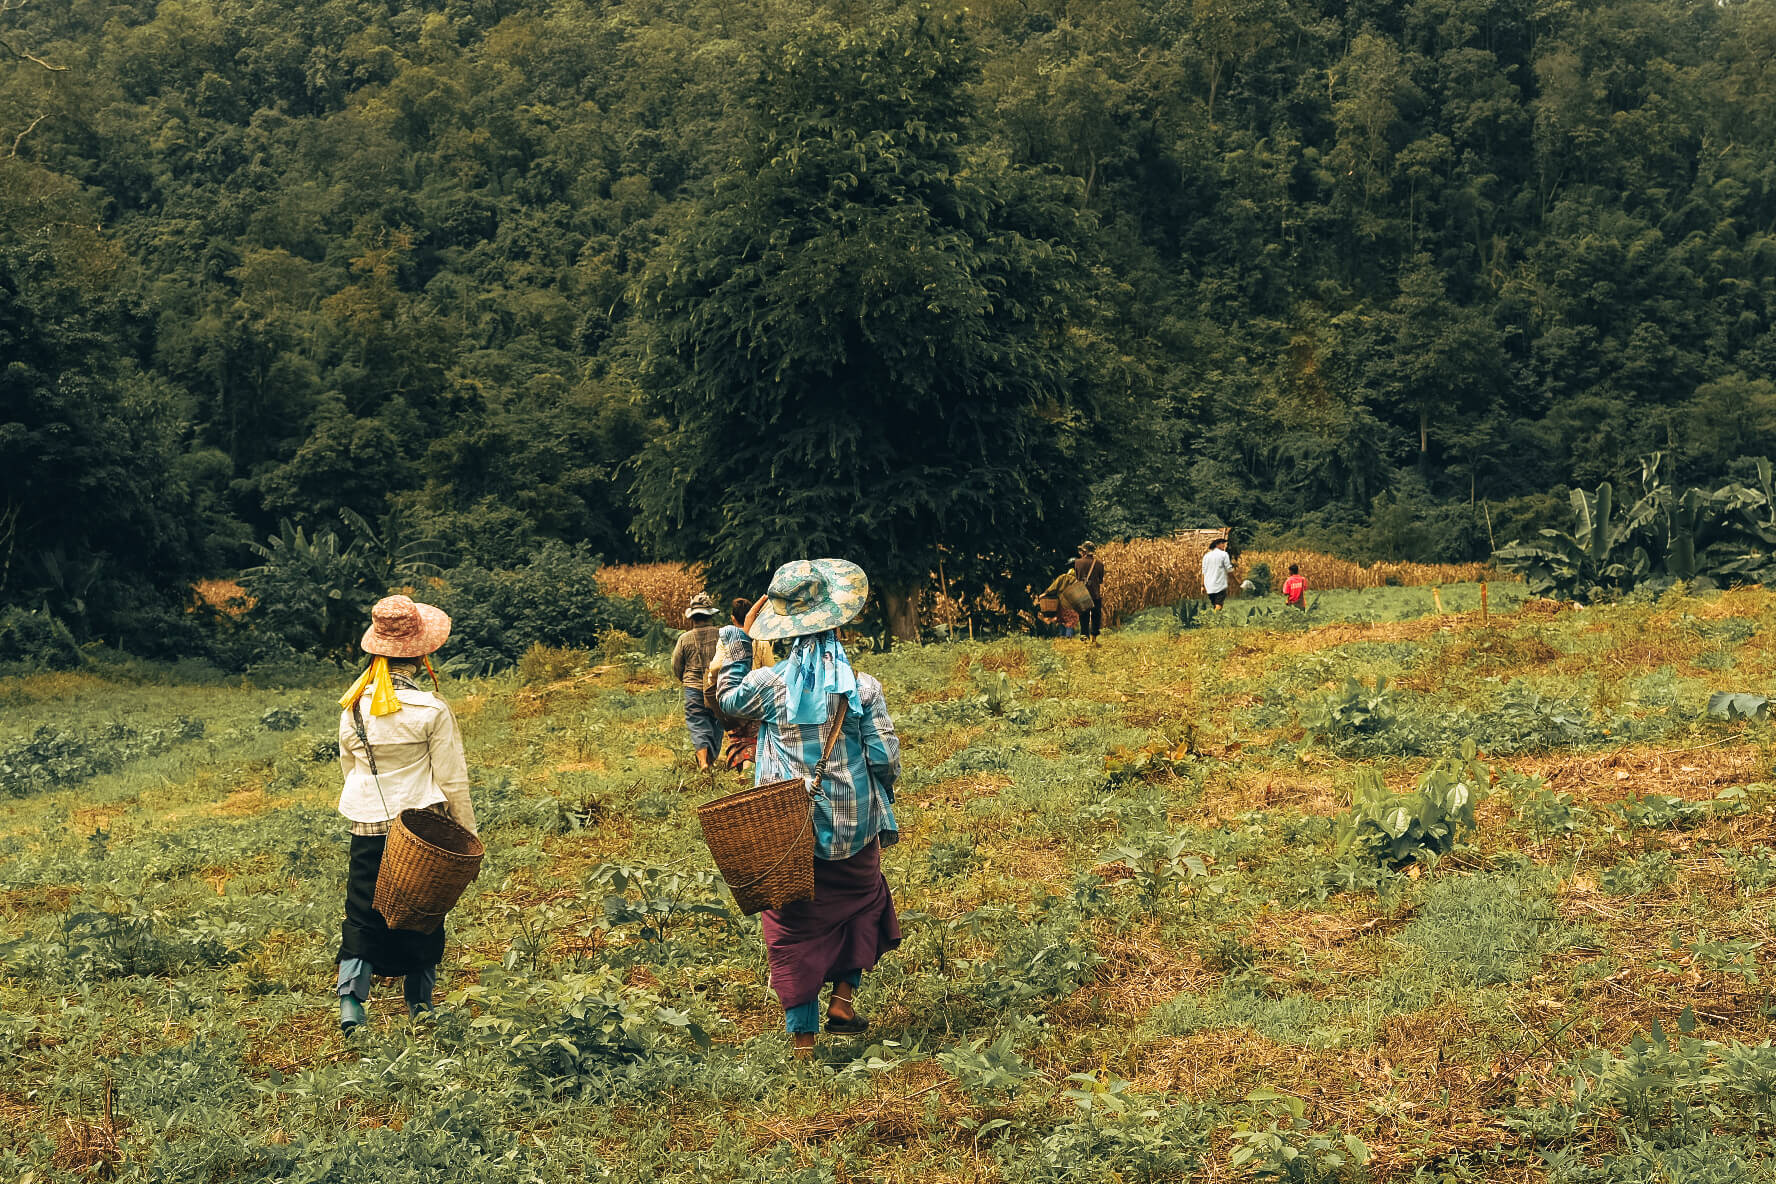 Villagers_out_working_on_the_land_in_Huay_Pu_Keng